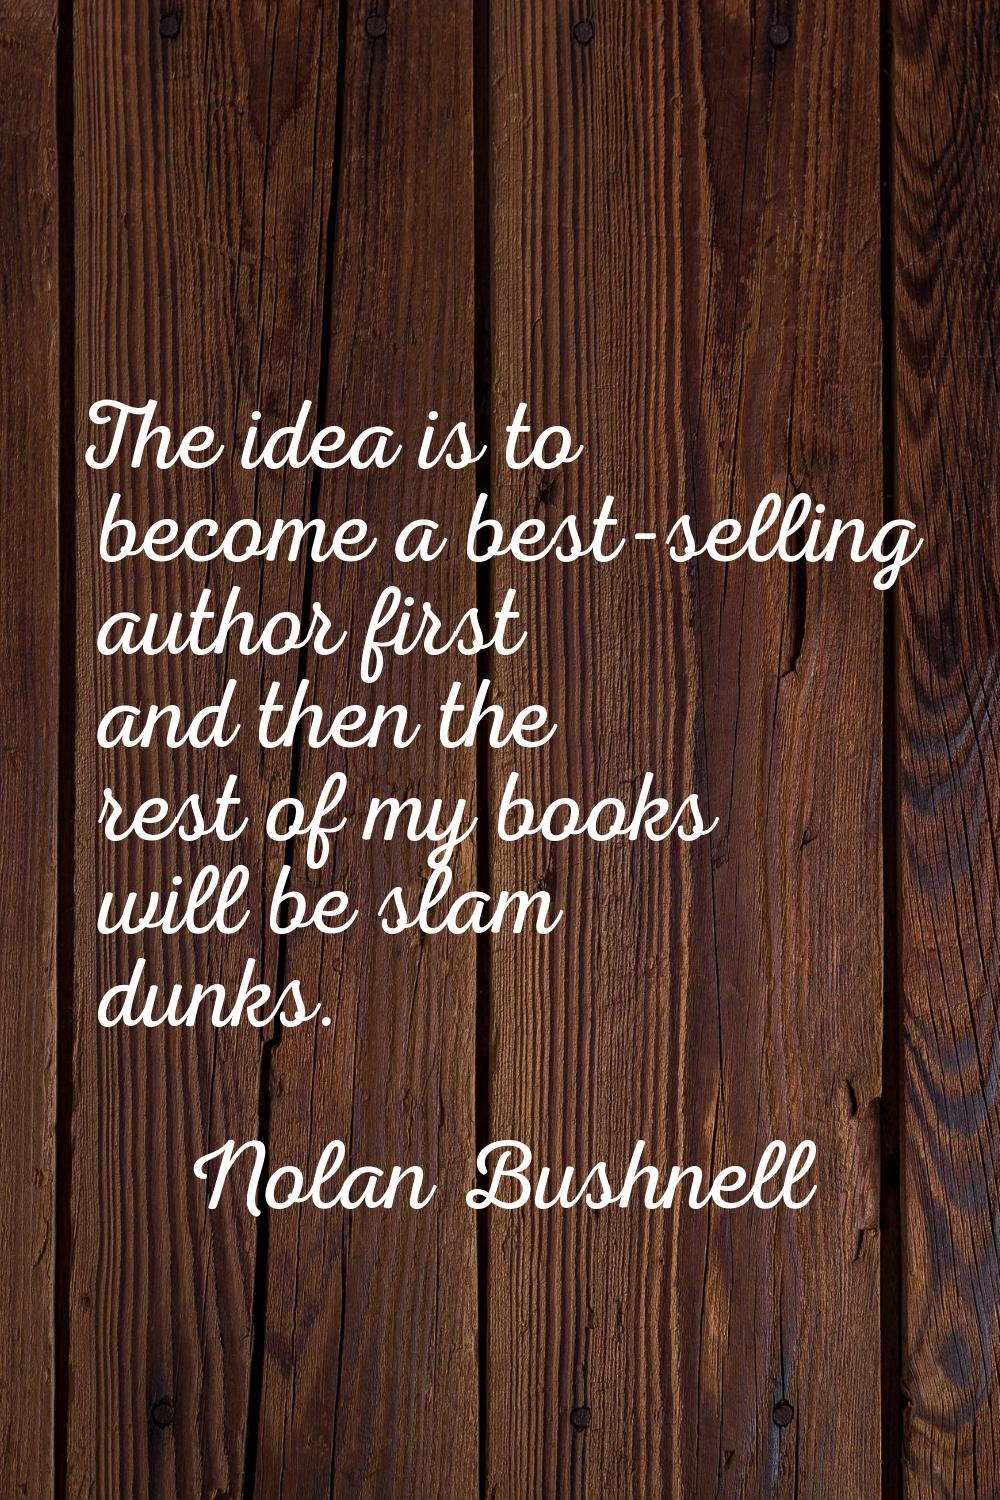 The idea is to become a best-selling author first and then the rest of my books will be slam dunks.